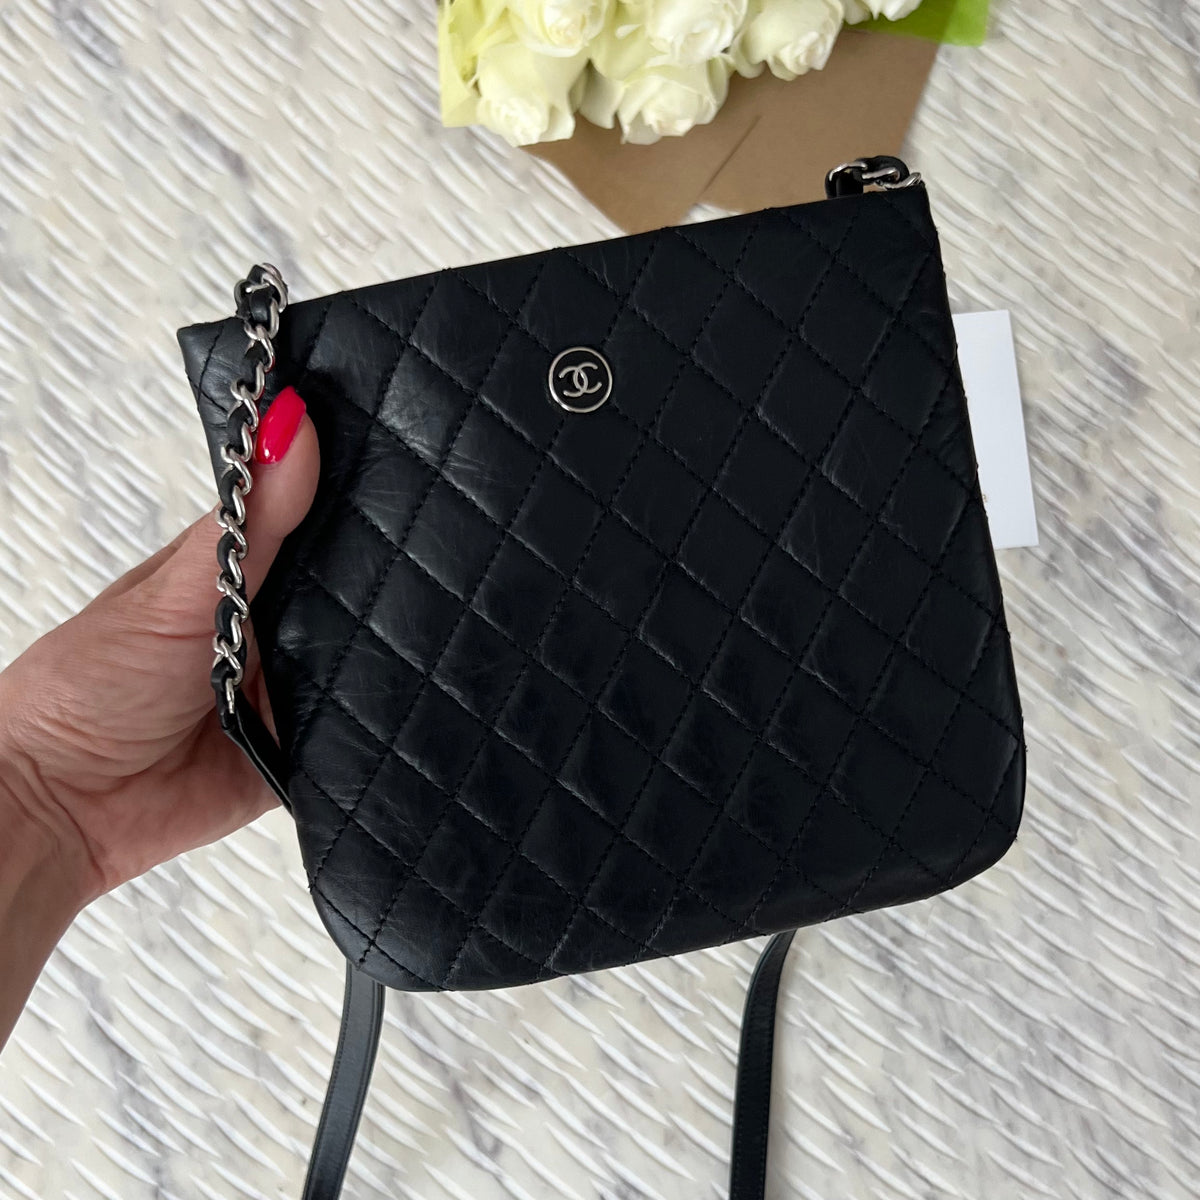 CHANEL, Bags, Chanel Quilted Uniform Crossbody Bag